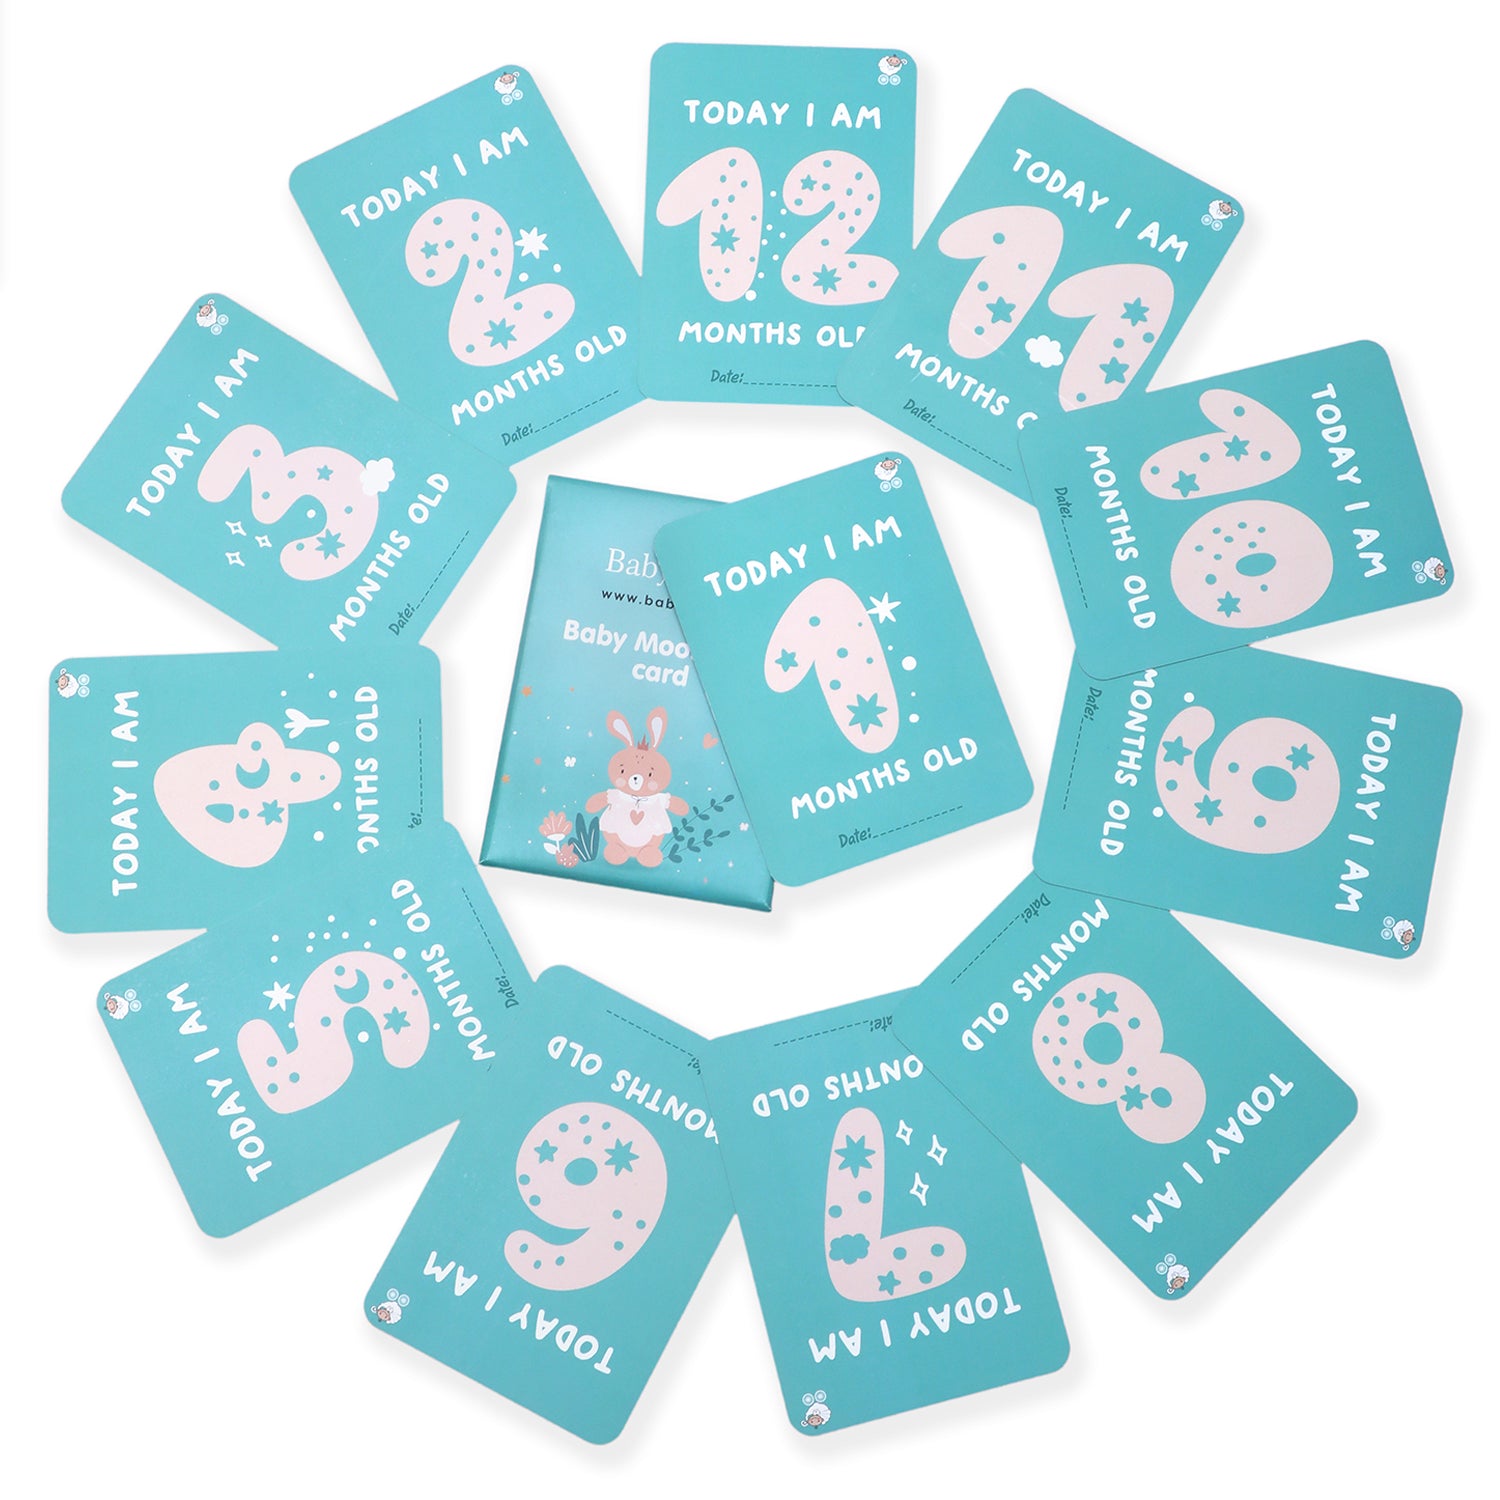 Baby MooMents First Year Milestone Cards - Baby Moo